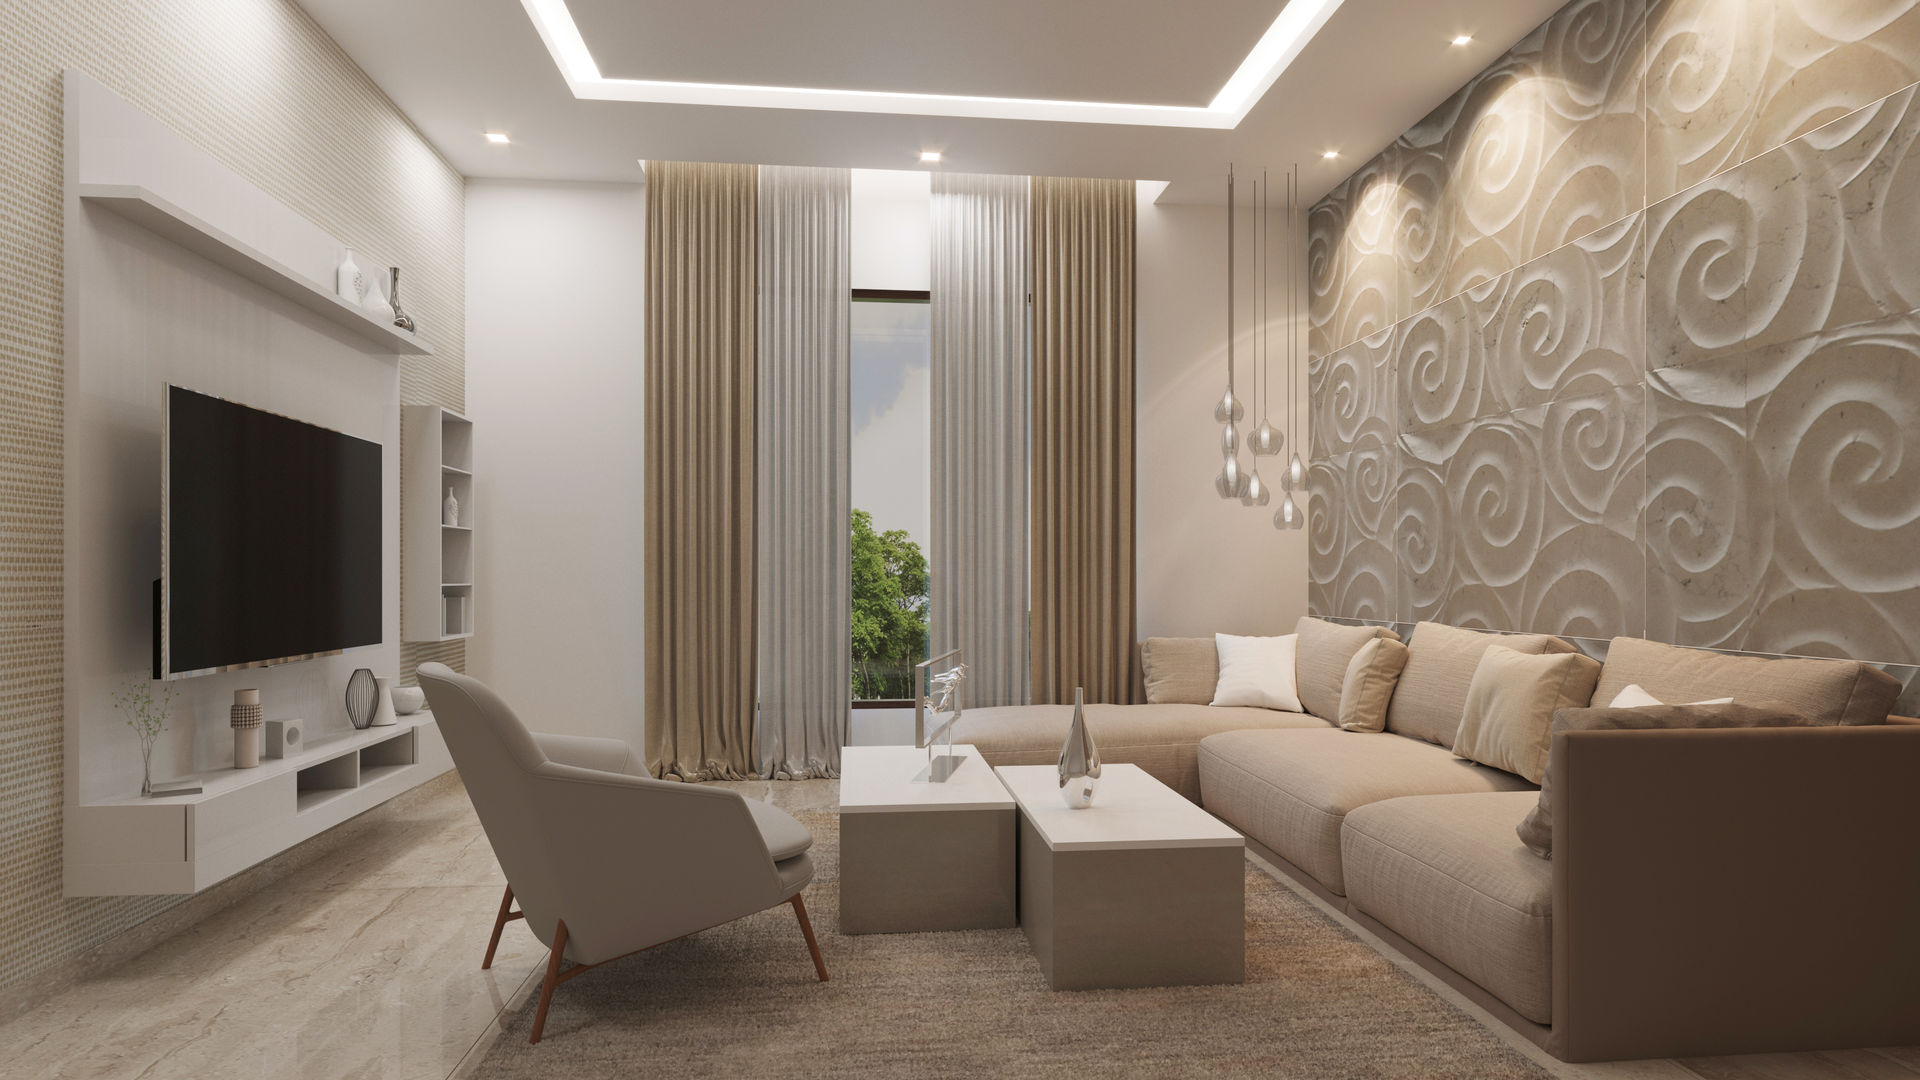 Living Room False Ceiling Design Rectangle Simple with Indirect LED Panel  and Spot Lights | CivilLane